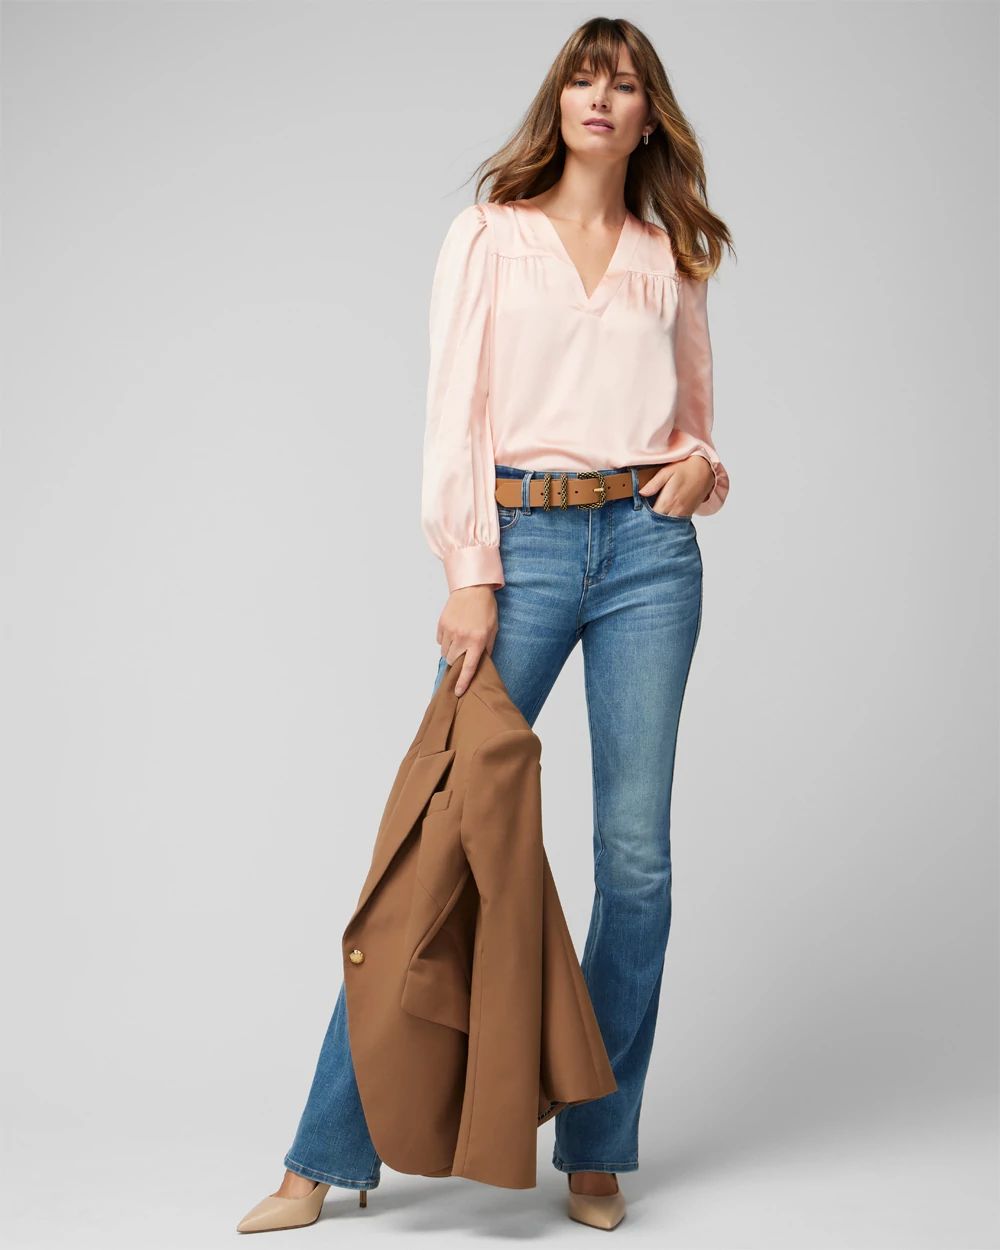 Petite Long Sleeve Topstitch Satin Blouse click to view larger image.